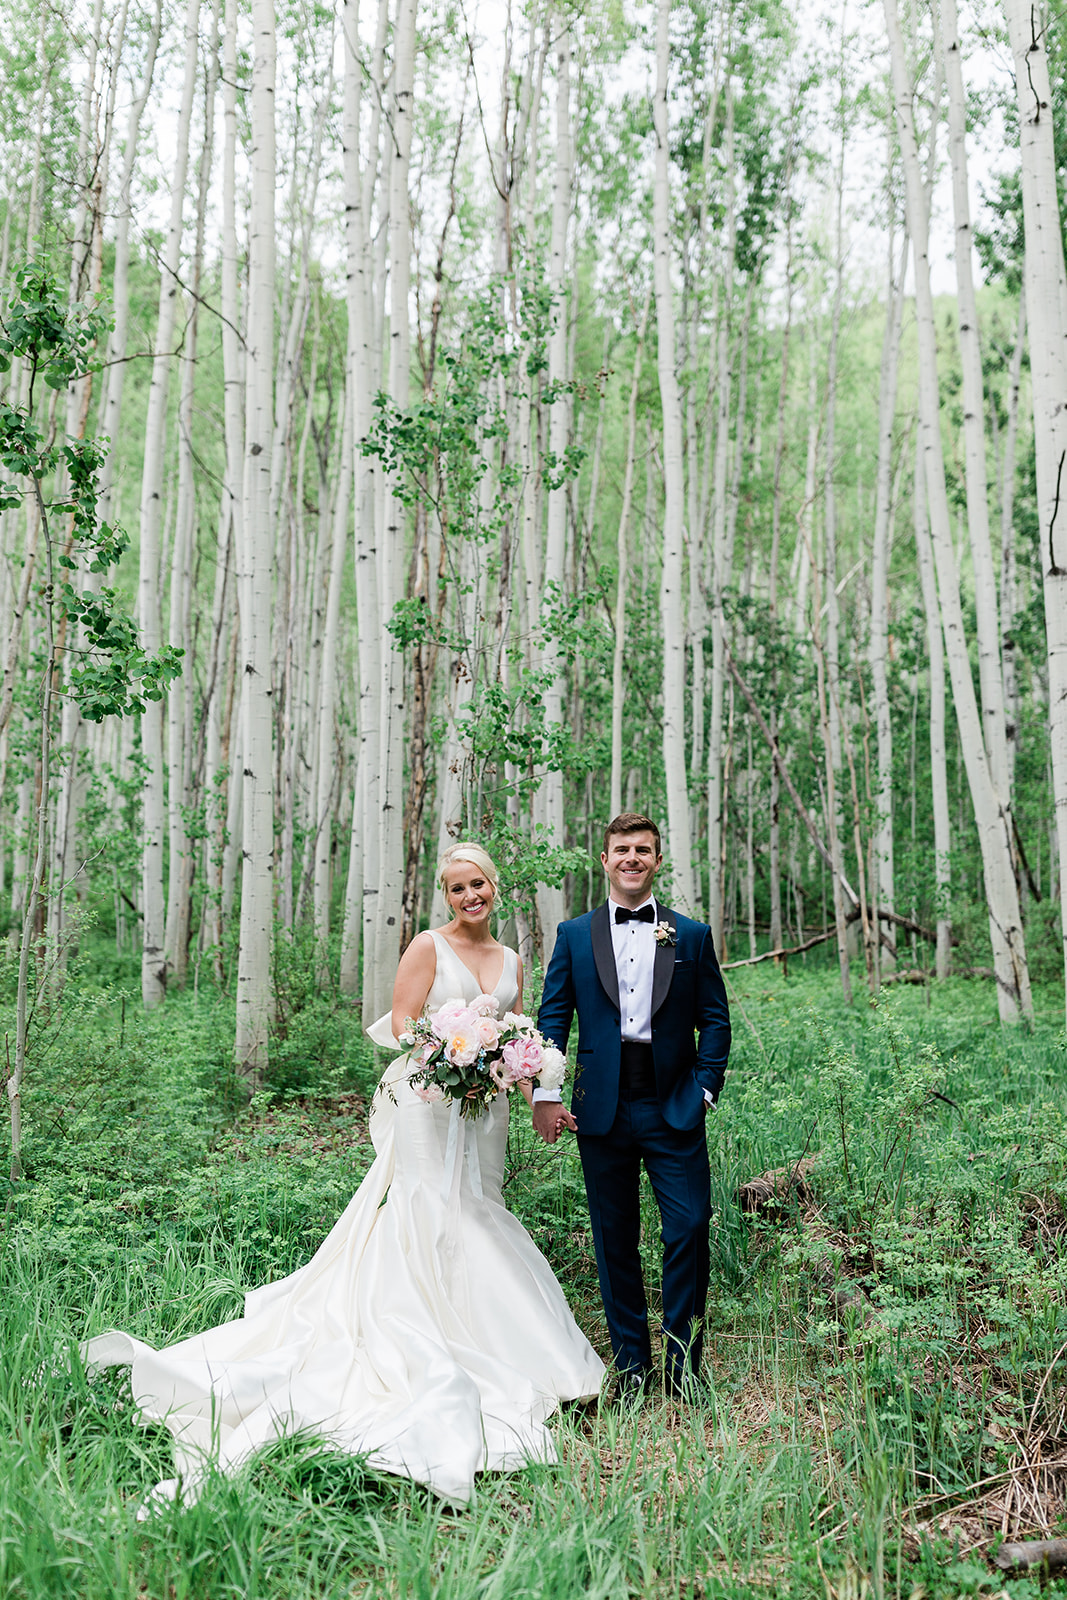 Vail bride and groom pose in strand of green aspen trees